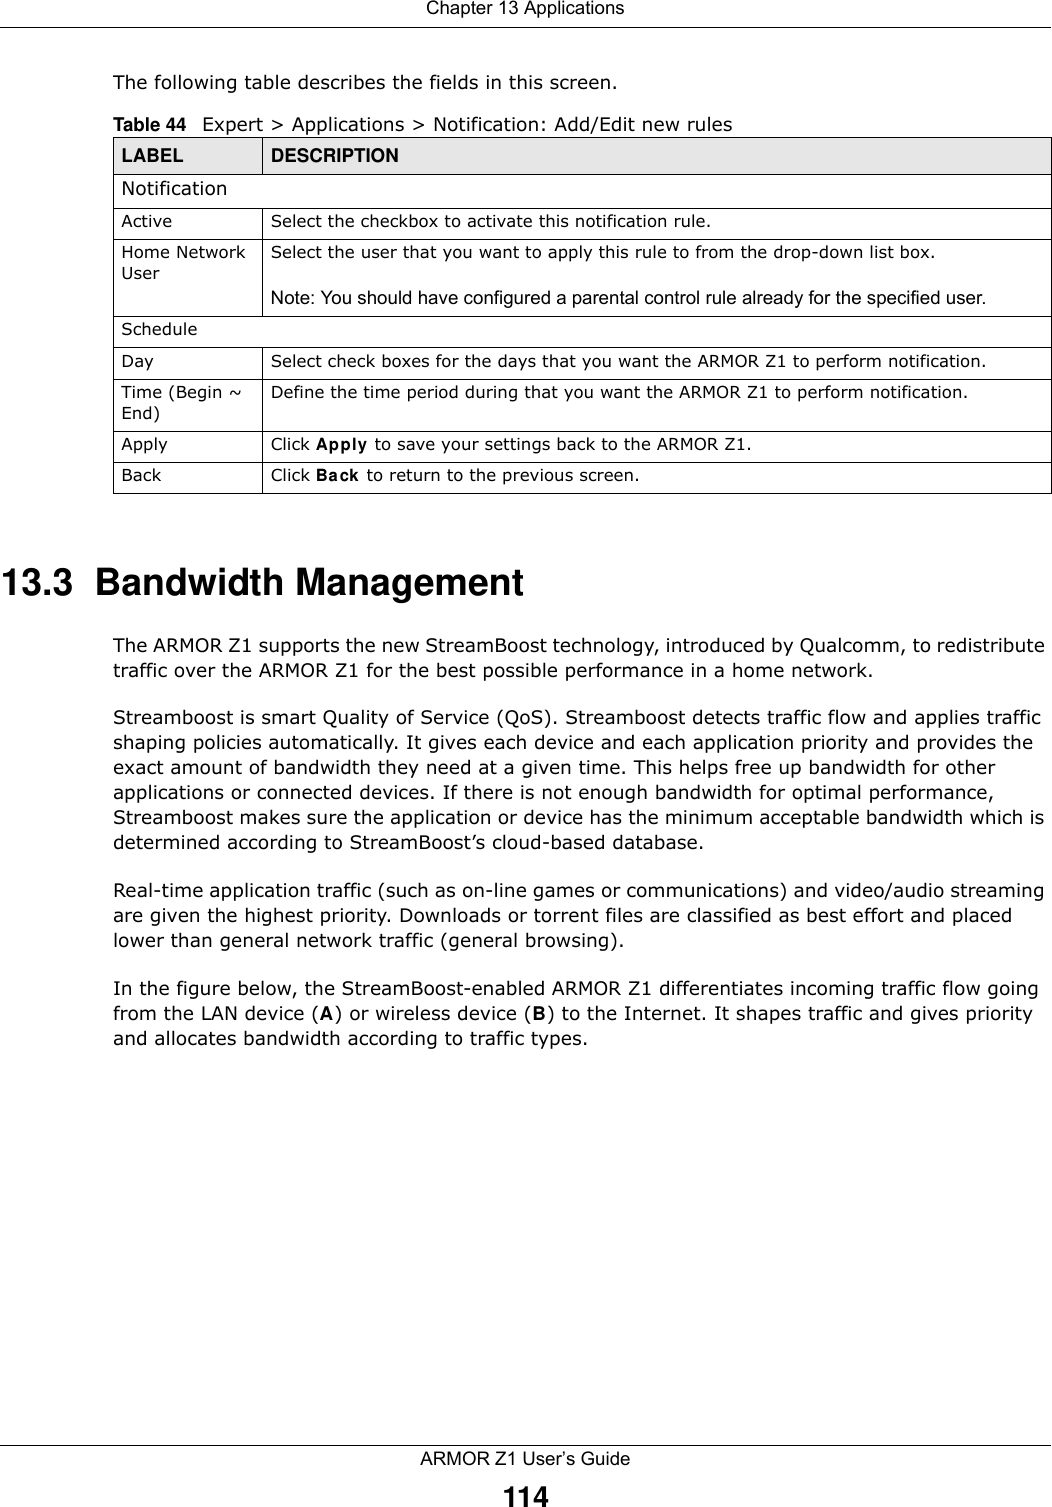 Chapter 13 ApplicationsARMOR Z1 User’s Guide114The following table describes the fields in this screen. 13.3  Bandwidth ManagementThe ARMOR Z1 supports the new StreamBoost technology, introduced by Qualcomm, to redistribute traffic over the ARMOR Z1 for the best possible performance in a home network. Streamboost is smart Quality of Service (QoS). Streamboost detects traffic flow and applies traffic shaping policies automatically. It gives each device and each application priority and provides the exact amount of bandwidth they need at a given time. This helps free up bandwidth for other applications or connected devices. If there is not enough bandwidth for optimal performance, Streamboost makes sure the application or device has the minimum acceptable bandwidth which is determined according to StreamBoost’s cloud-based database. Real-time application traffic (such as on-line games or communications) and video/audio streaming are given the highest priority. Downloads or torrent files are classified as best effort and placed lower than general network traffic (general browsing).In the figure below, the StreamBoost-enabled ARMOR Z1 differentiates incoming traffic flow going from the LAN device (A) or wireless device (B) to the Internet. It shapes traffic and gives priority and allocates bandwidth according to traffic types.Table 44   Expert &gt; Applications &gt; Notification: Add/Edit new rulesLABEL DESCRIPTIONNotificationActive Select the checkbox to activate this notification rule.Home Network UserSelect the user that you want to apply this rule to from the drop-down list box.Note: You should have configured a parental control rule already for the specified user.ScheduleDay Select check boxes for the days that you want the ARMOR Z1 to perform notification. Time (Begin ~ End)Define the time period during that you want the ARMOR Z1 to perform notification.Apply Click Apply to save your settings back to the ARMOR Z1.Back Click Back to return to the previous screen.